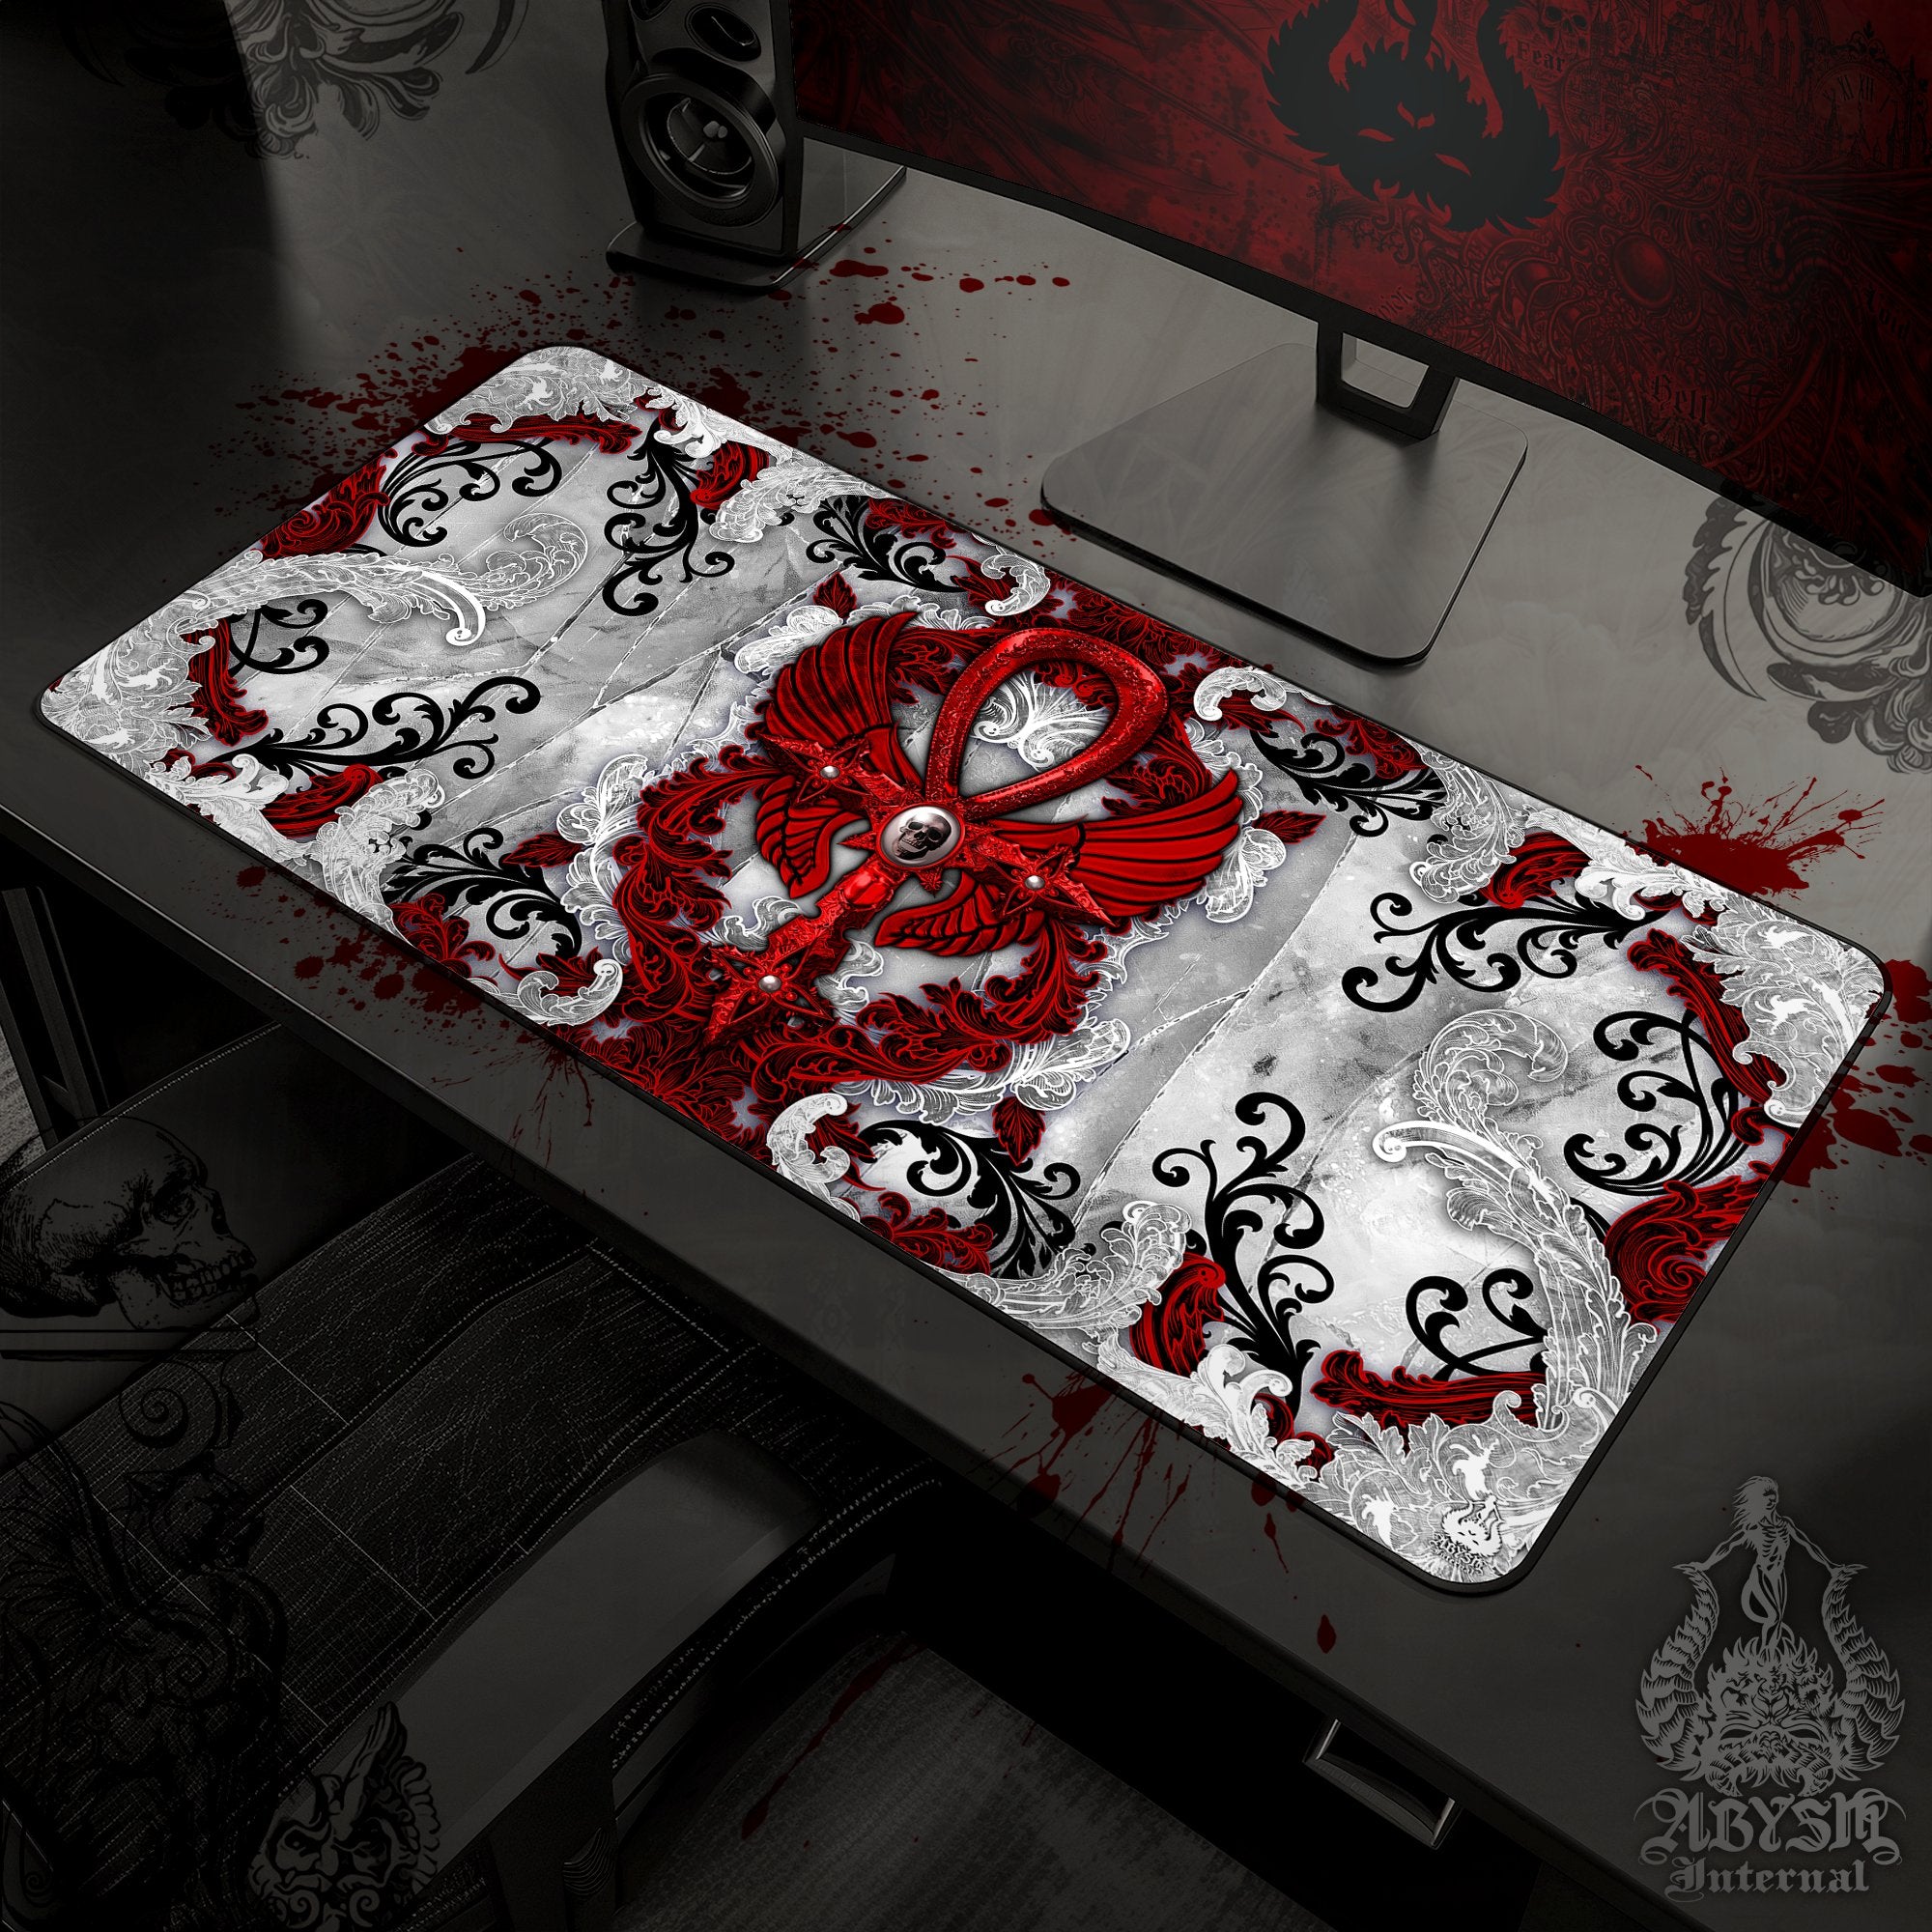 White Goth Desk Mat, Ankh Gaming Mouse Pad, Bloody Cross Table Protector Cover, Skull Workpad, Art Print - 3 Colors - Abysm Internal